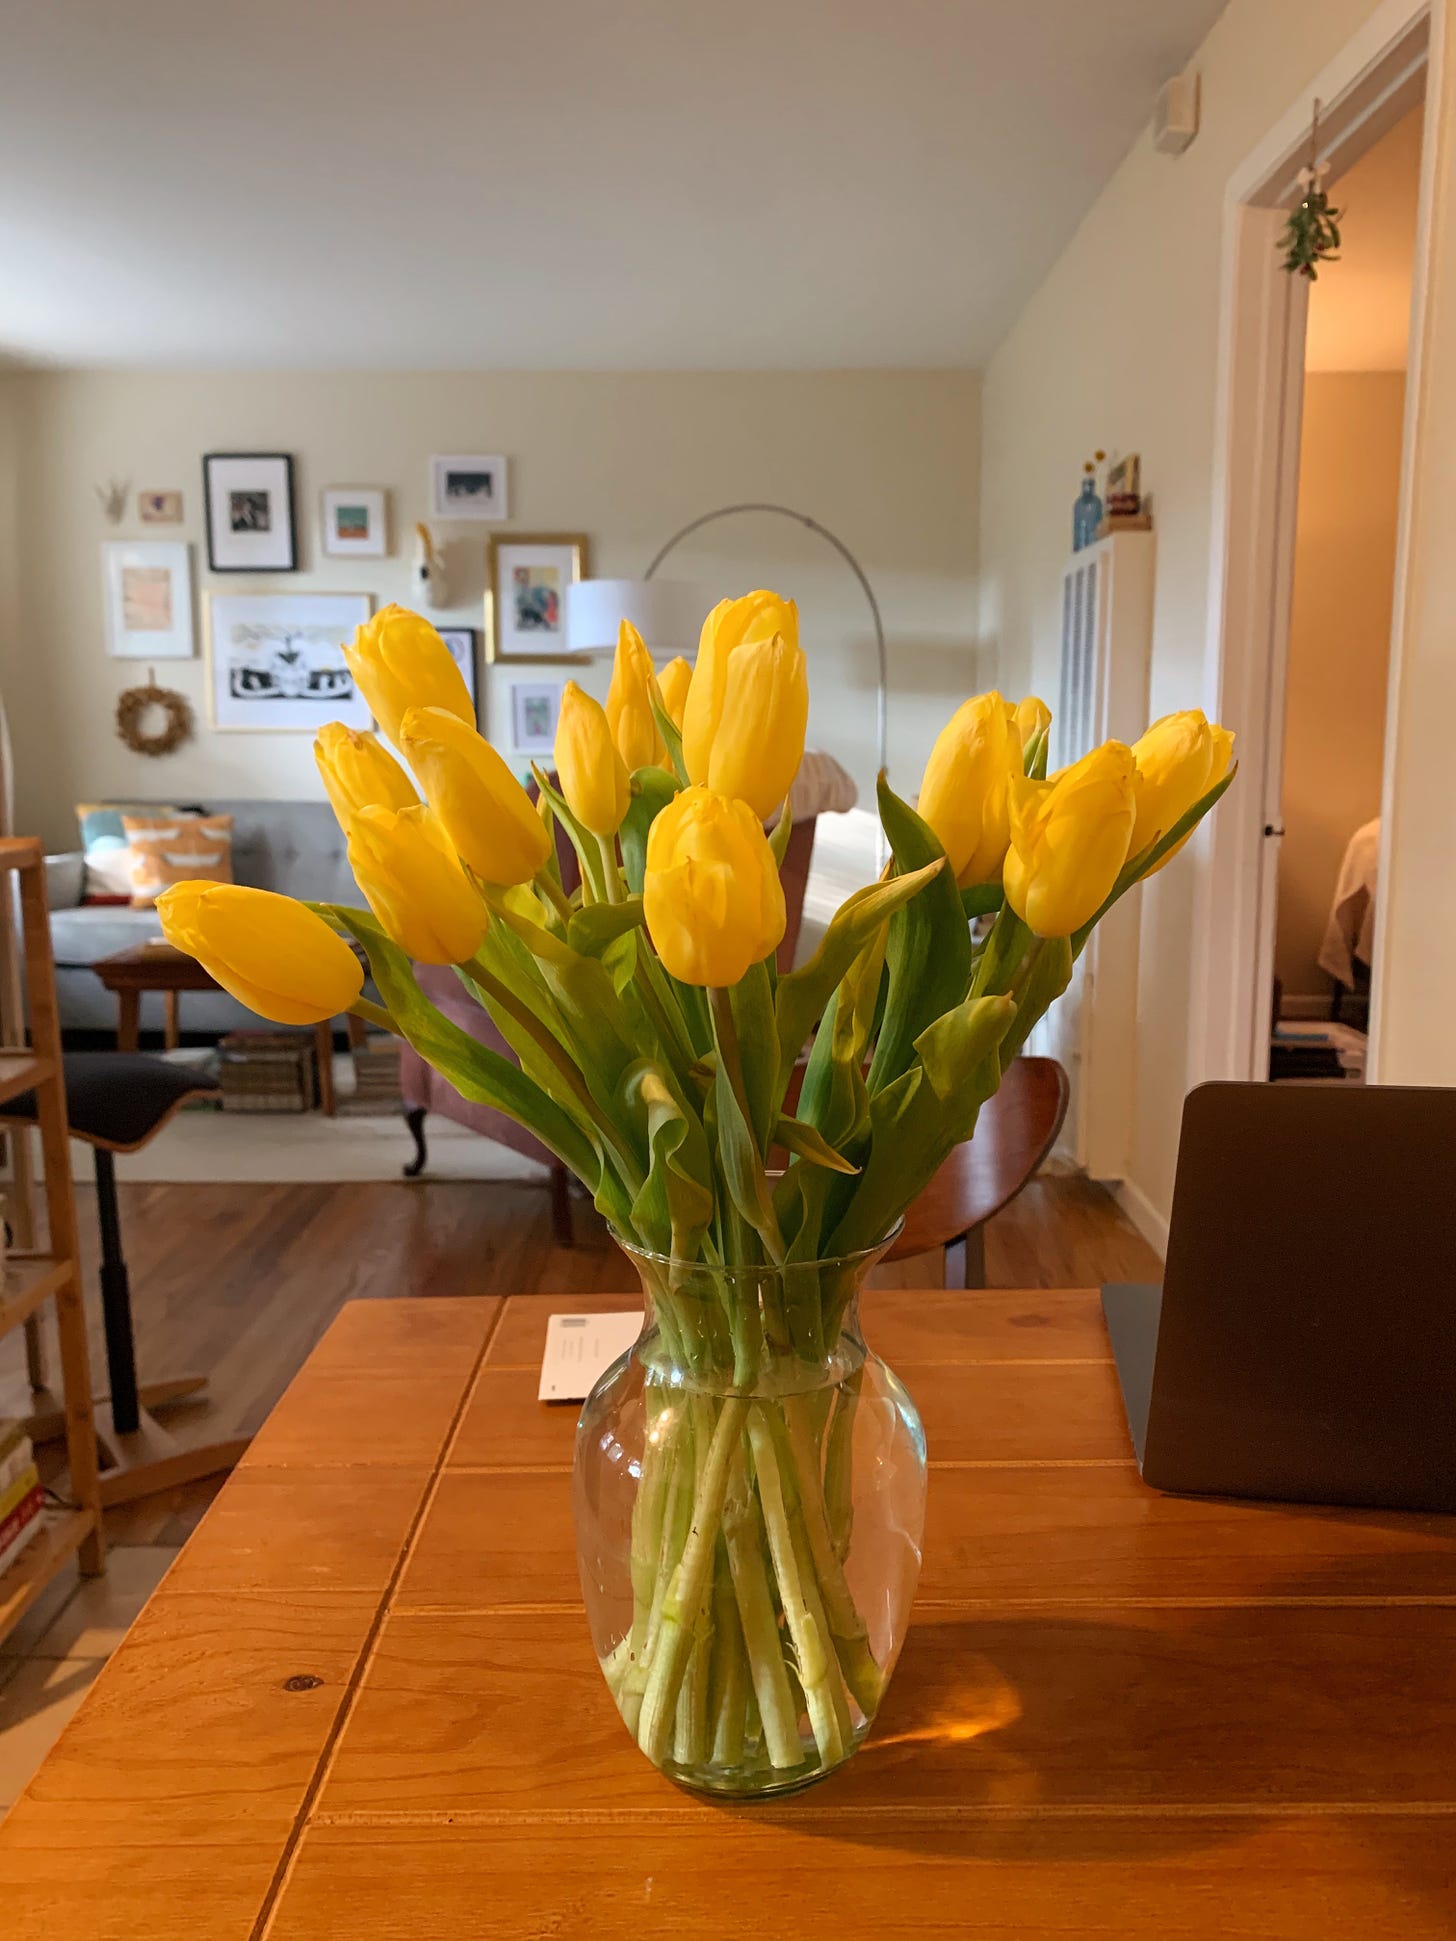 A bright yellow bouquet in a vase sits on a wooden table.